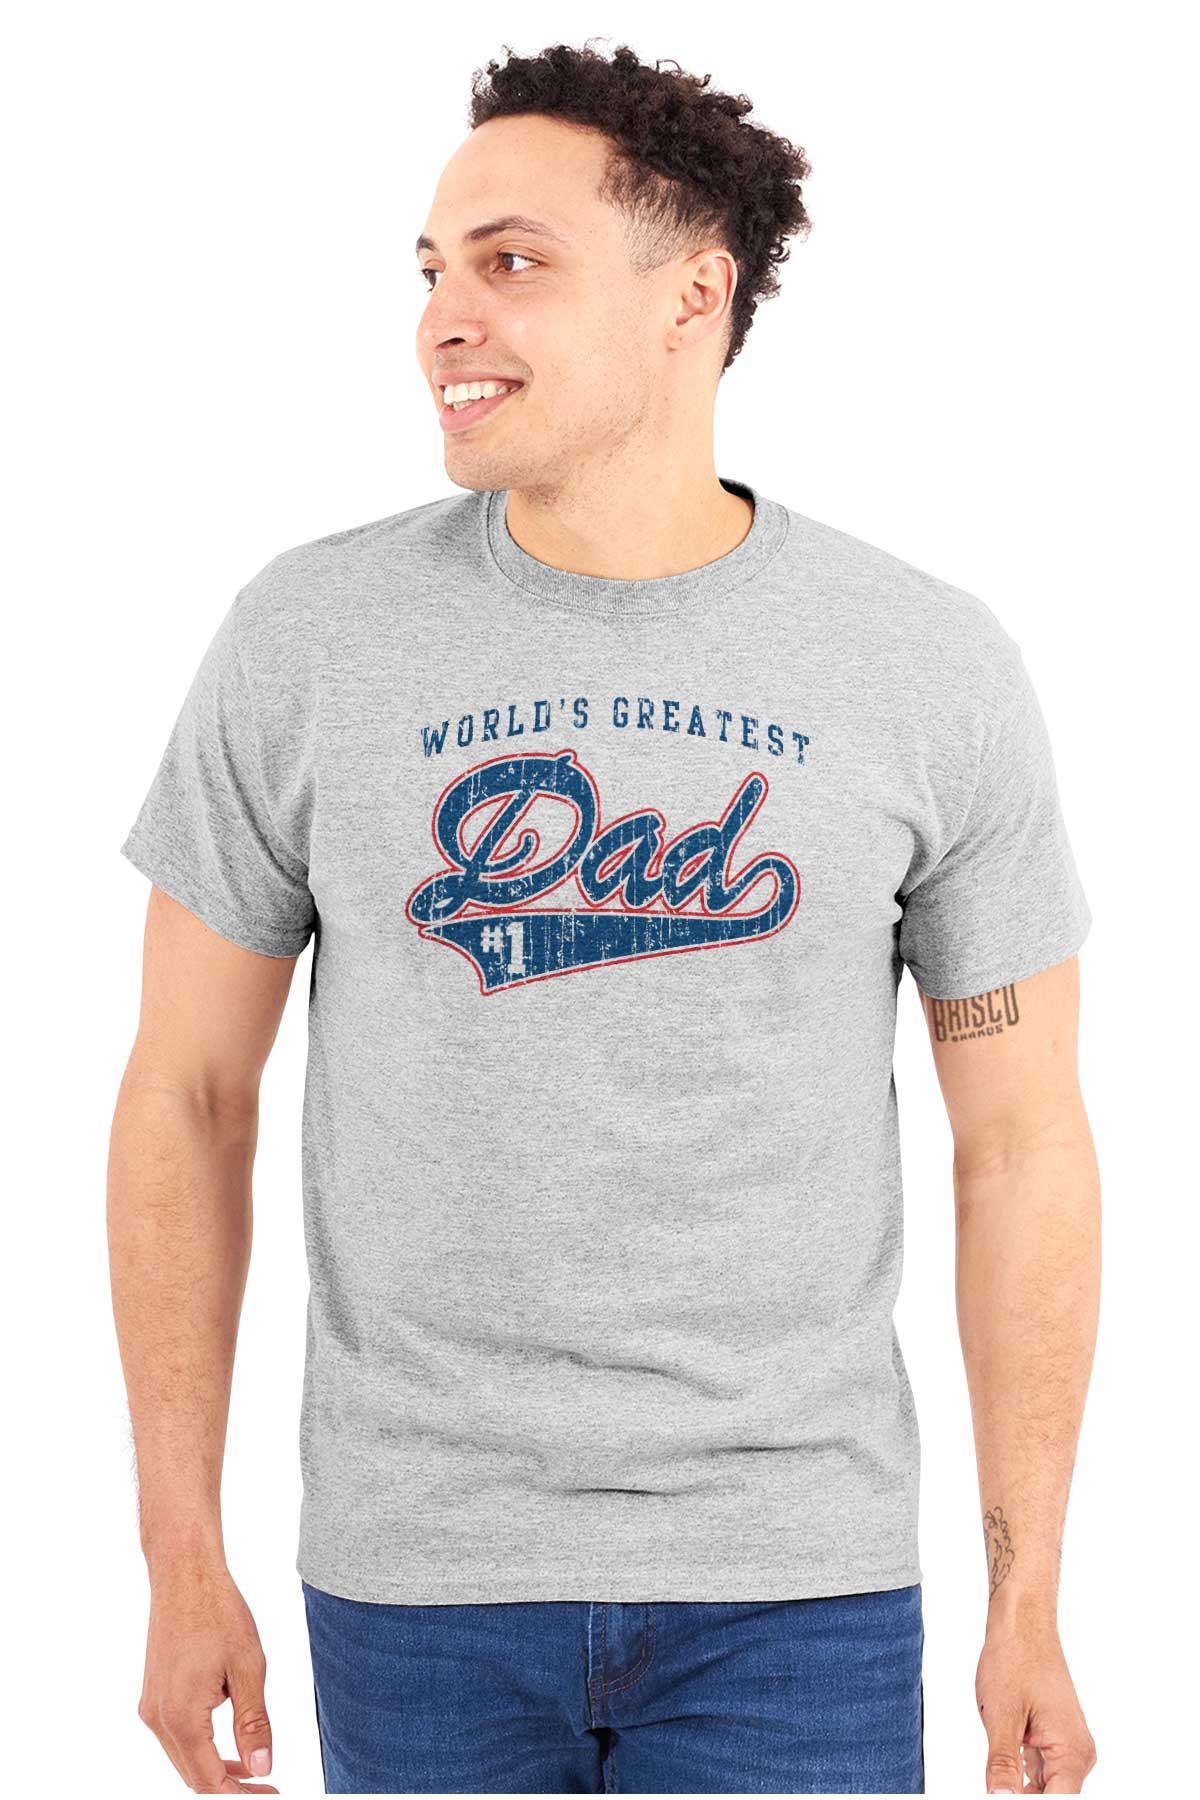 World's Greatest Dad Number 1 Father Men's Graphic T Shirt Tees Brisco Brands S - image 1 of 5